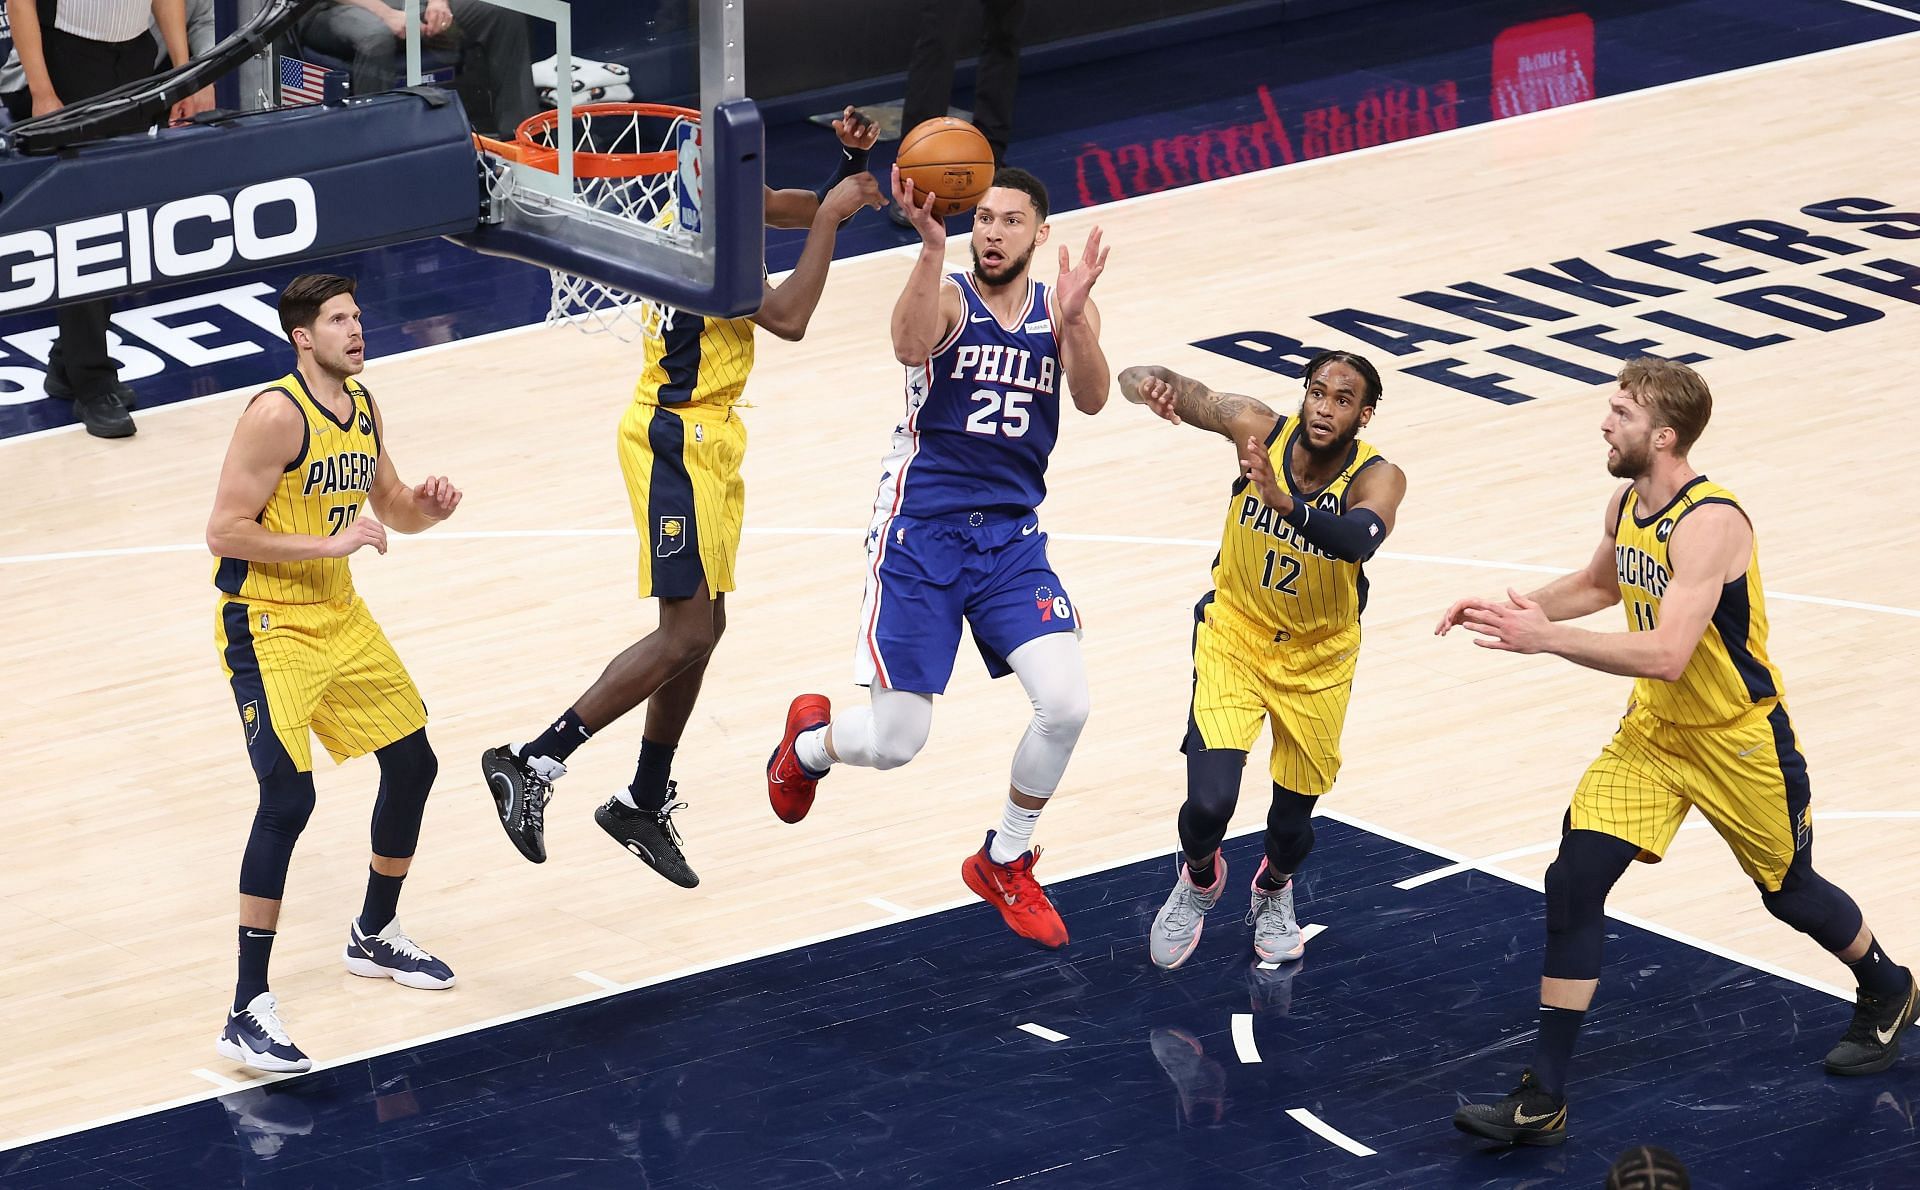 Philadelphia 76ers #25 Ben Simmons in action against the Indiana Pacers.